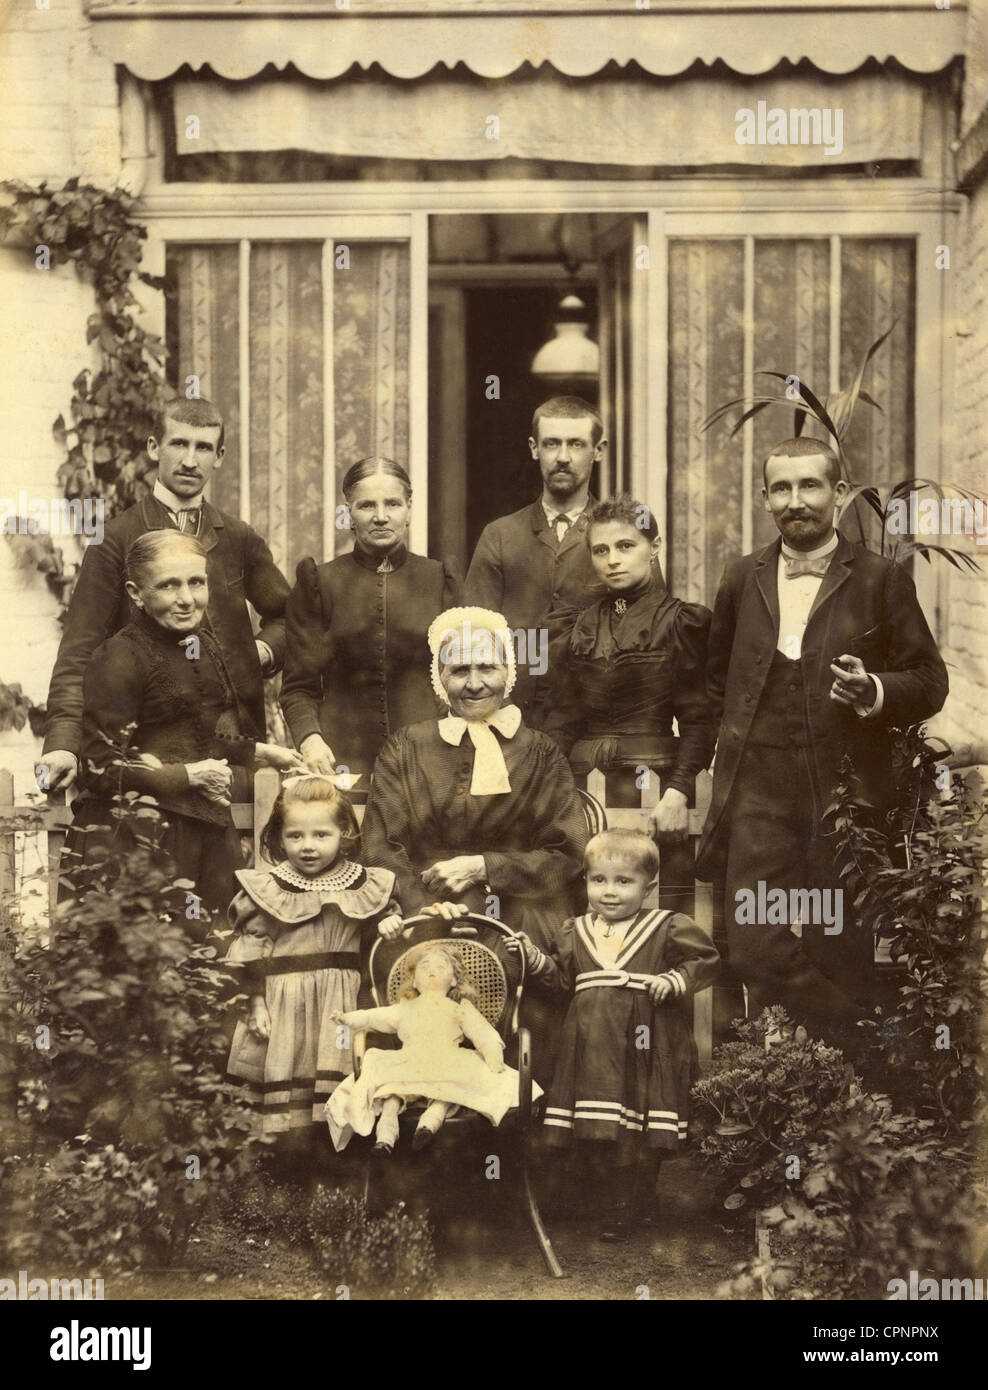 people, family, extended family, Germany, circa 1900, Additional-Rights-Clearences-Not Available Stock Photo